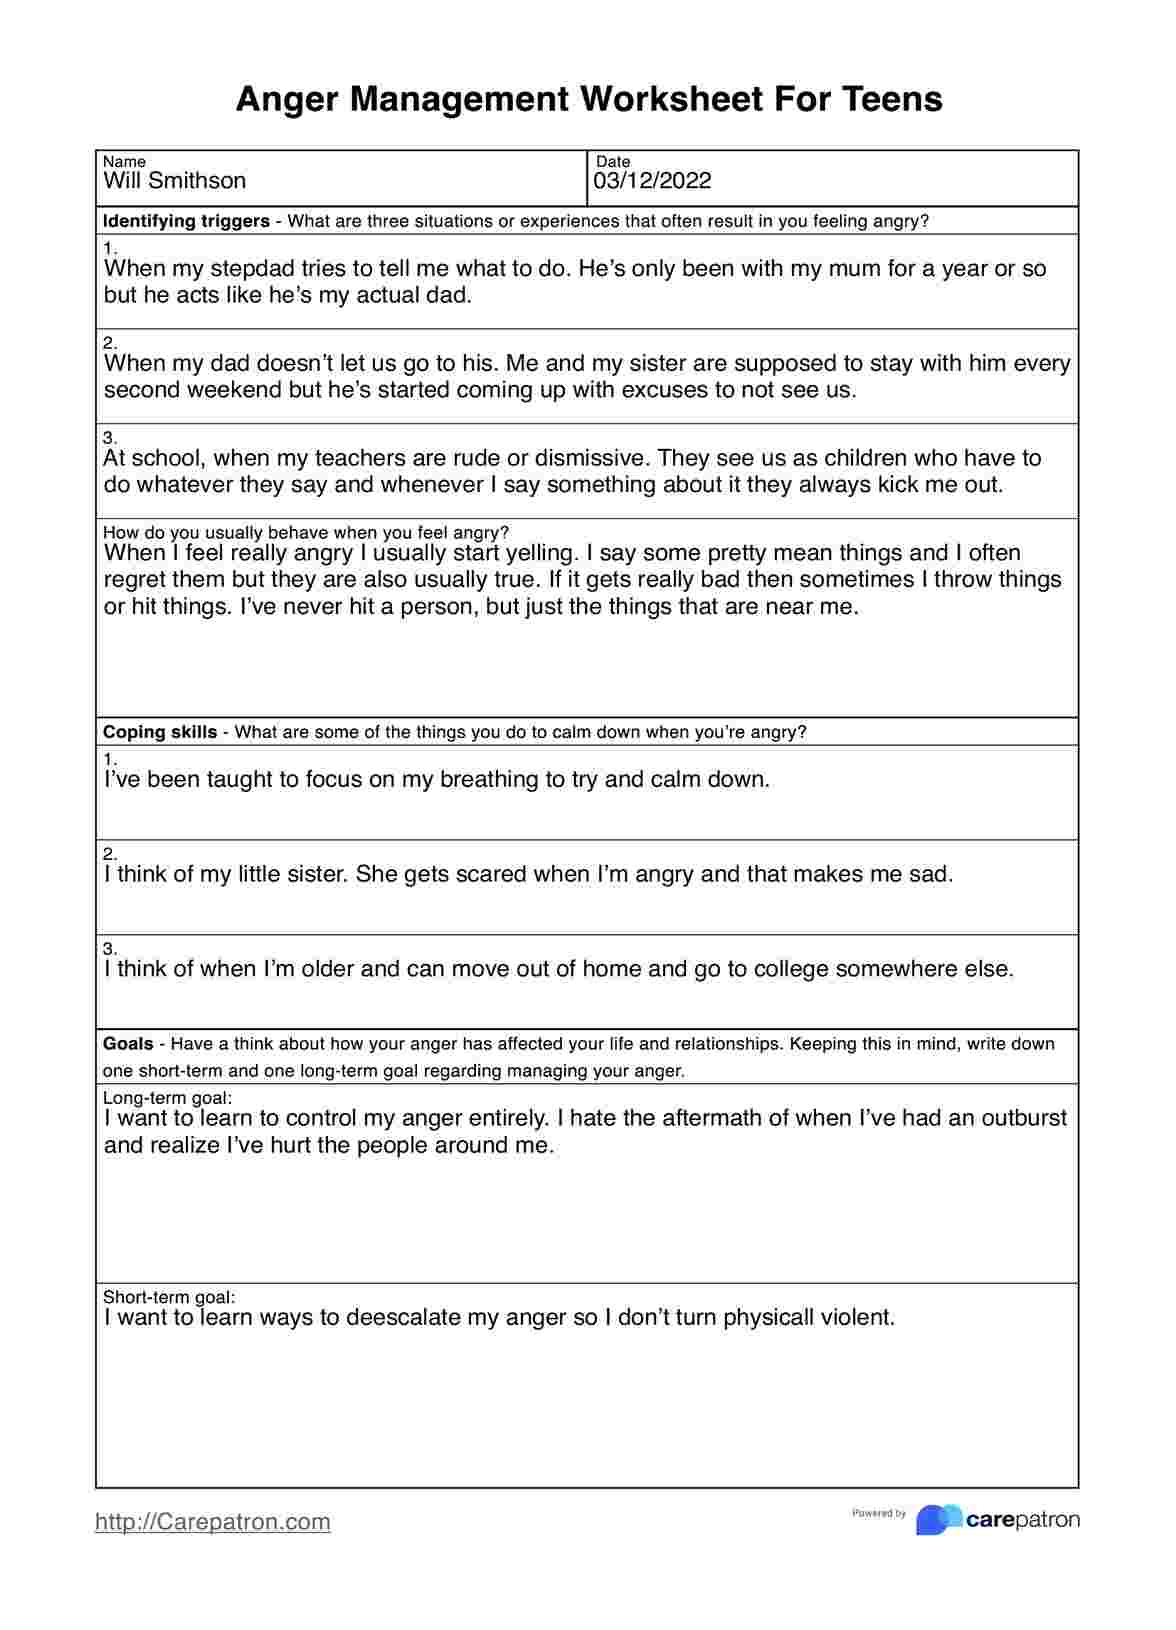 Anger Management Worksheets For Teens PDF Example